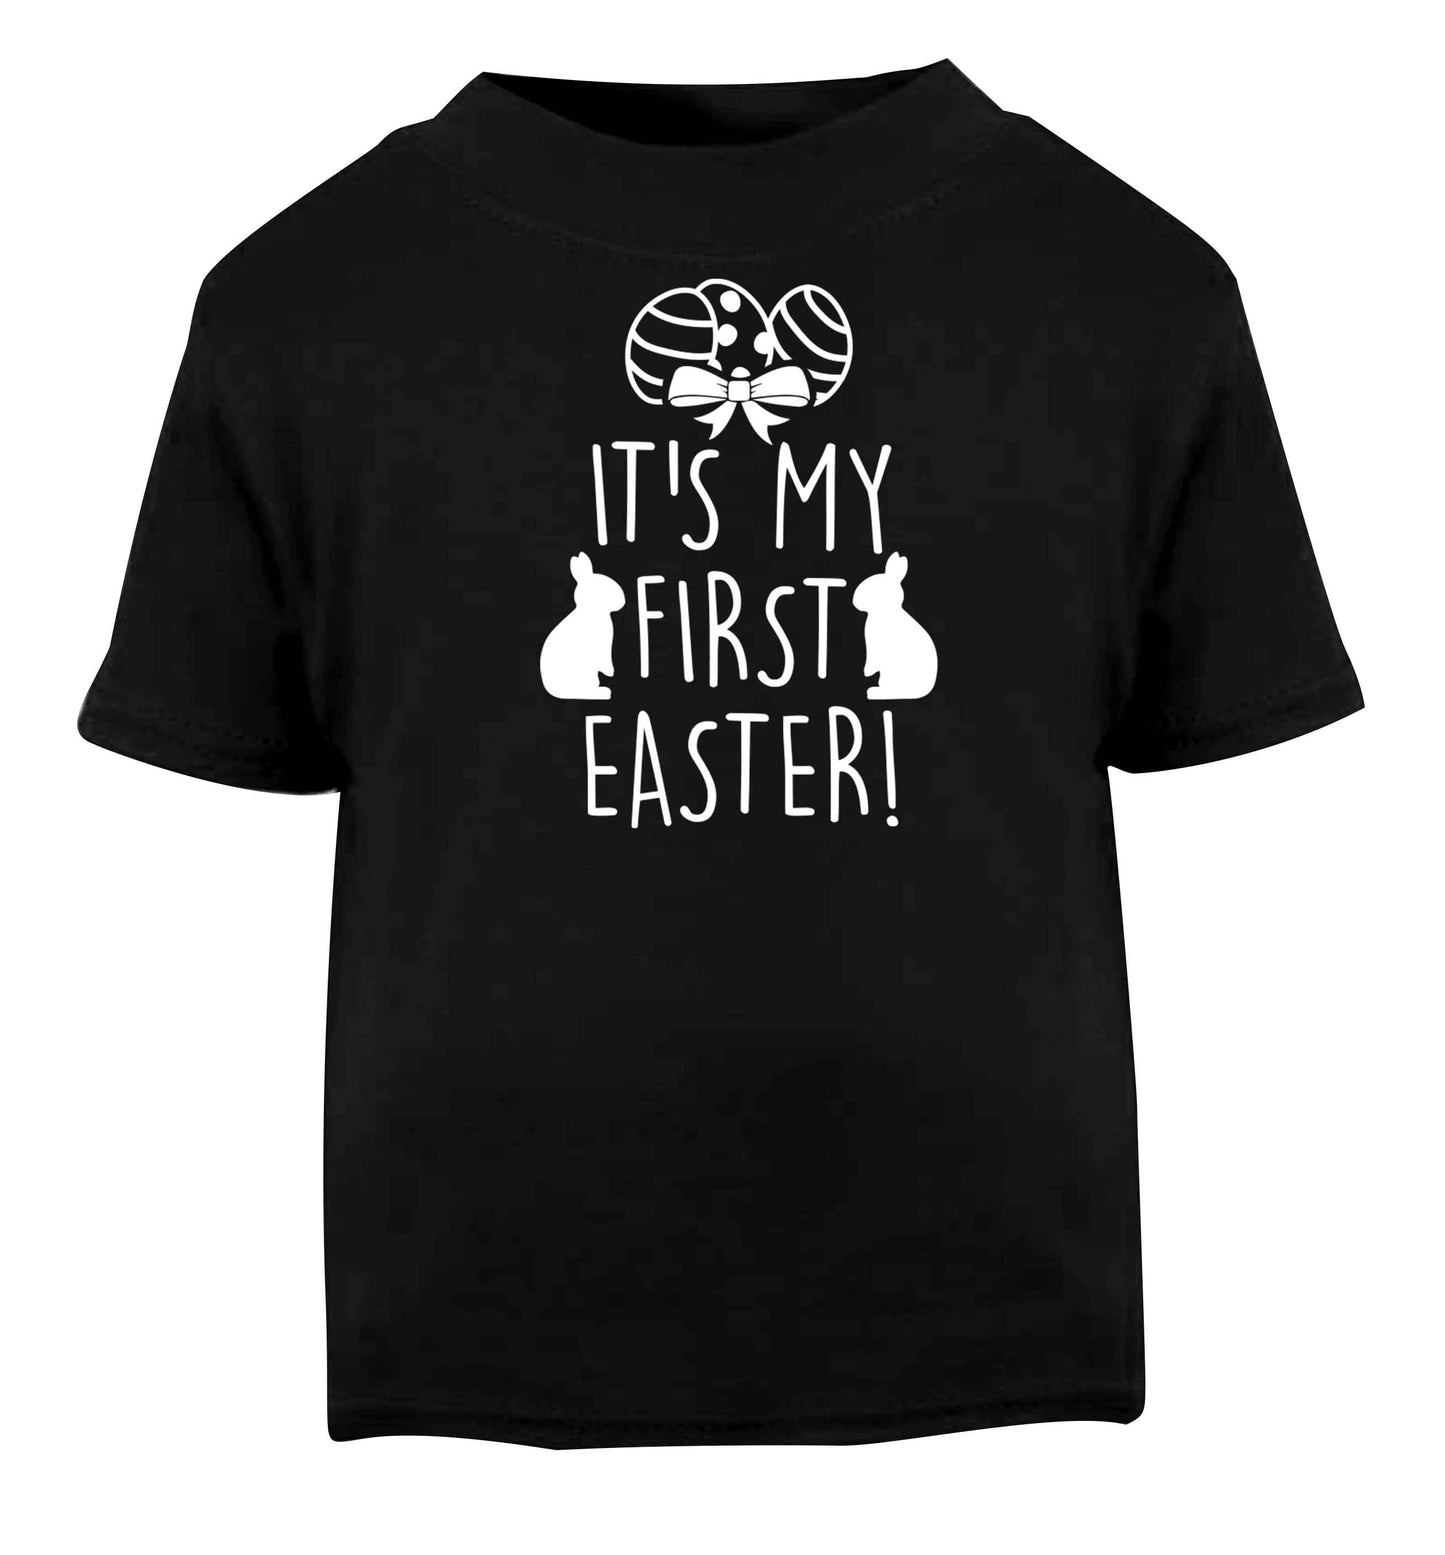 It's my first Easter Black baby toddler Tshirt 2 years